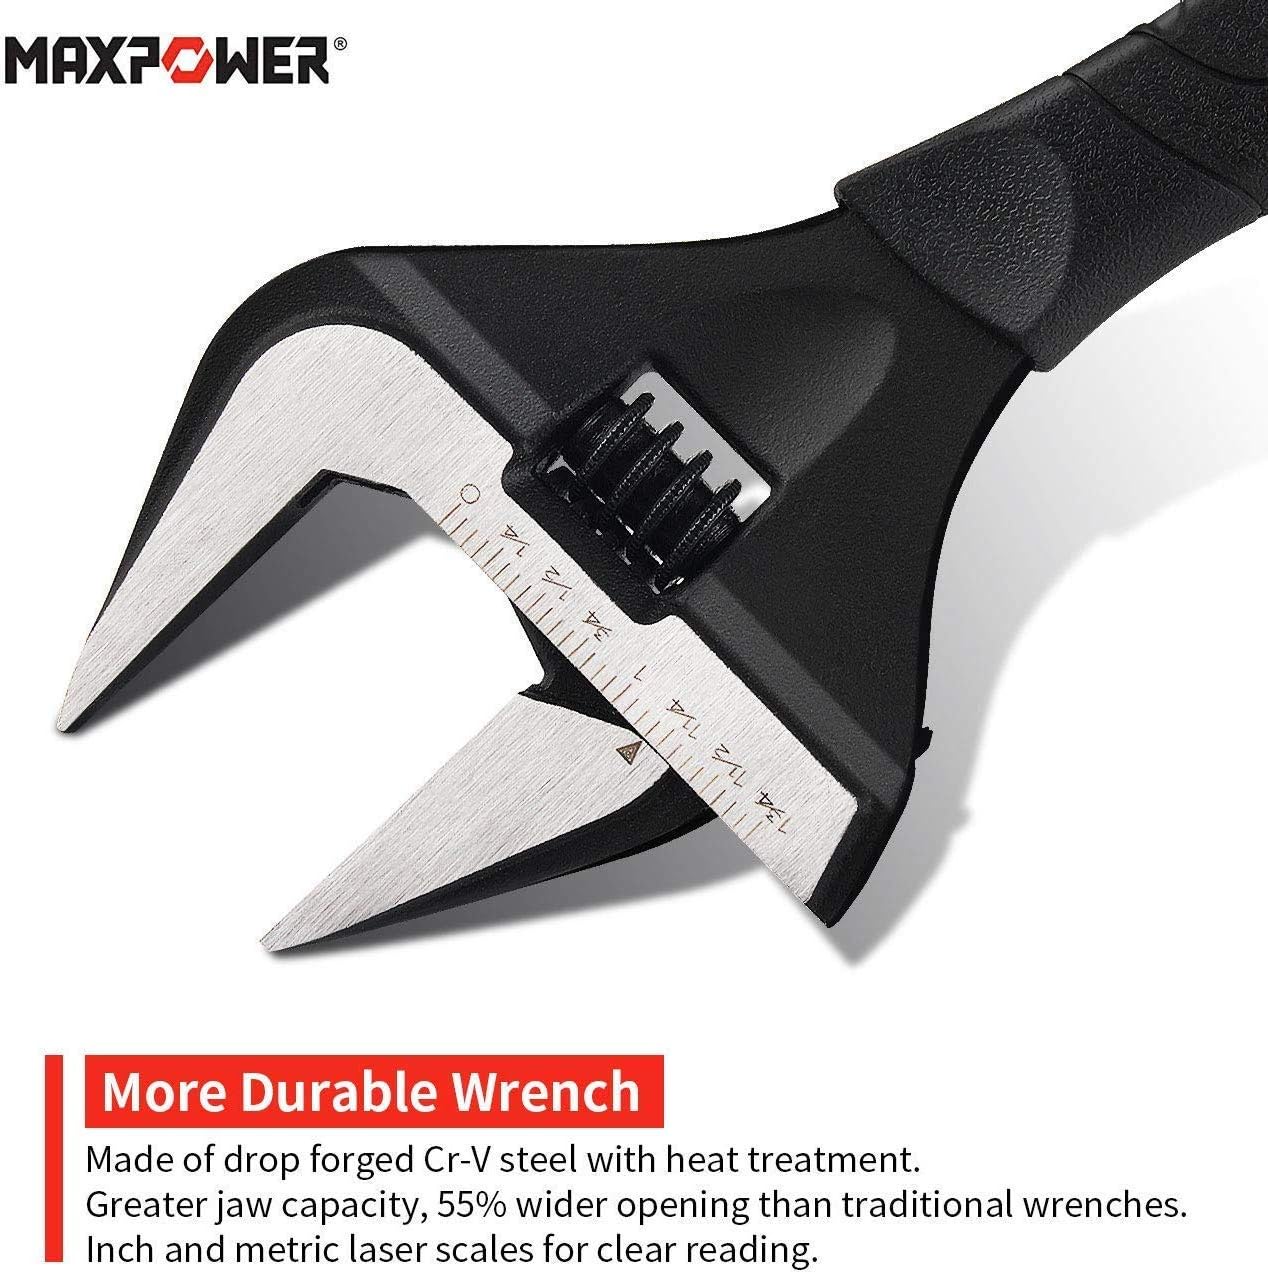 Maxpower Stubby Adjustable Wrench Deep Jaw Wide Opening, 6-Inch and 10-Inch Plumbing Wrench Set with Kitbag